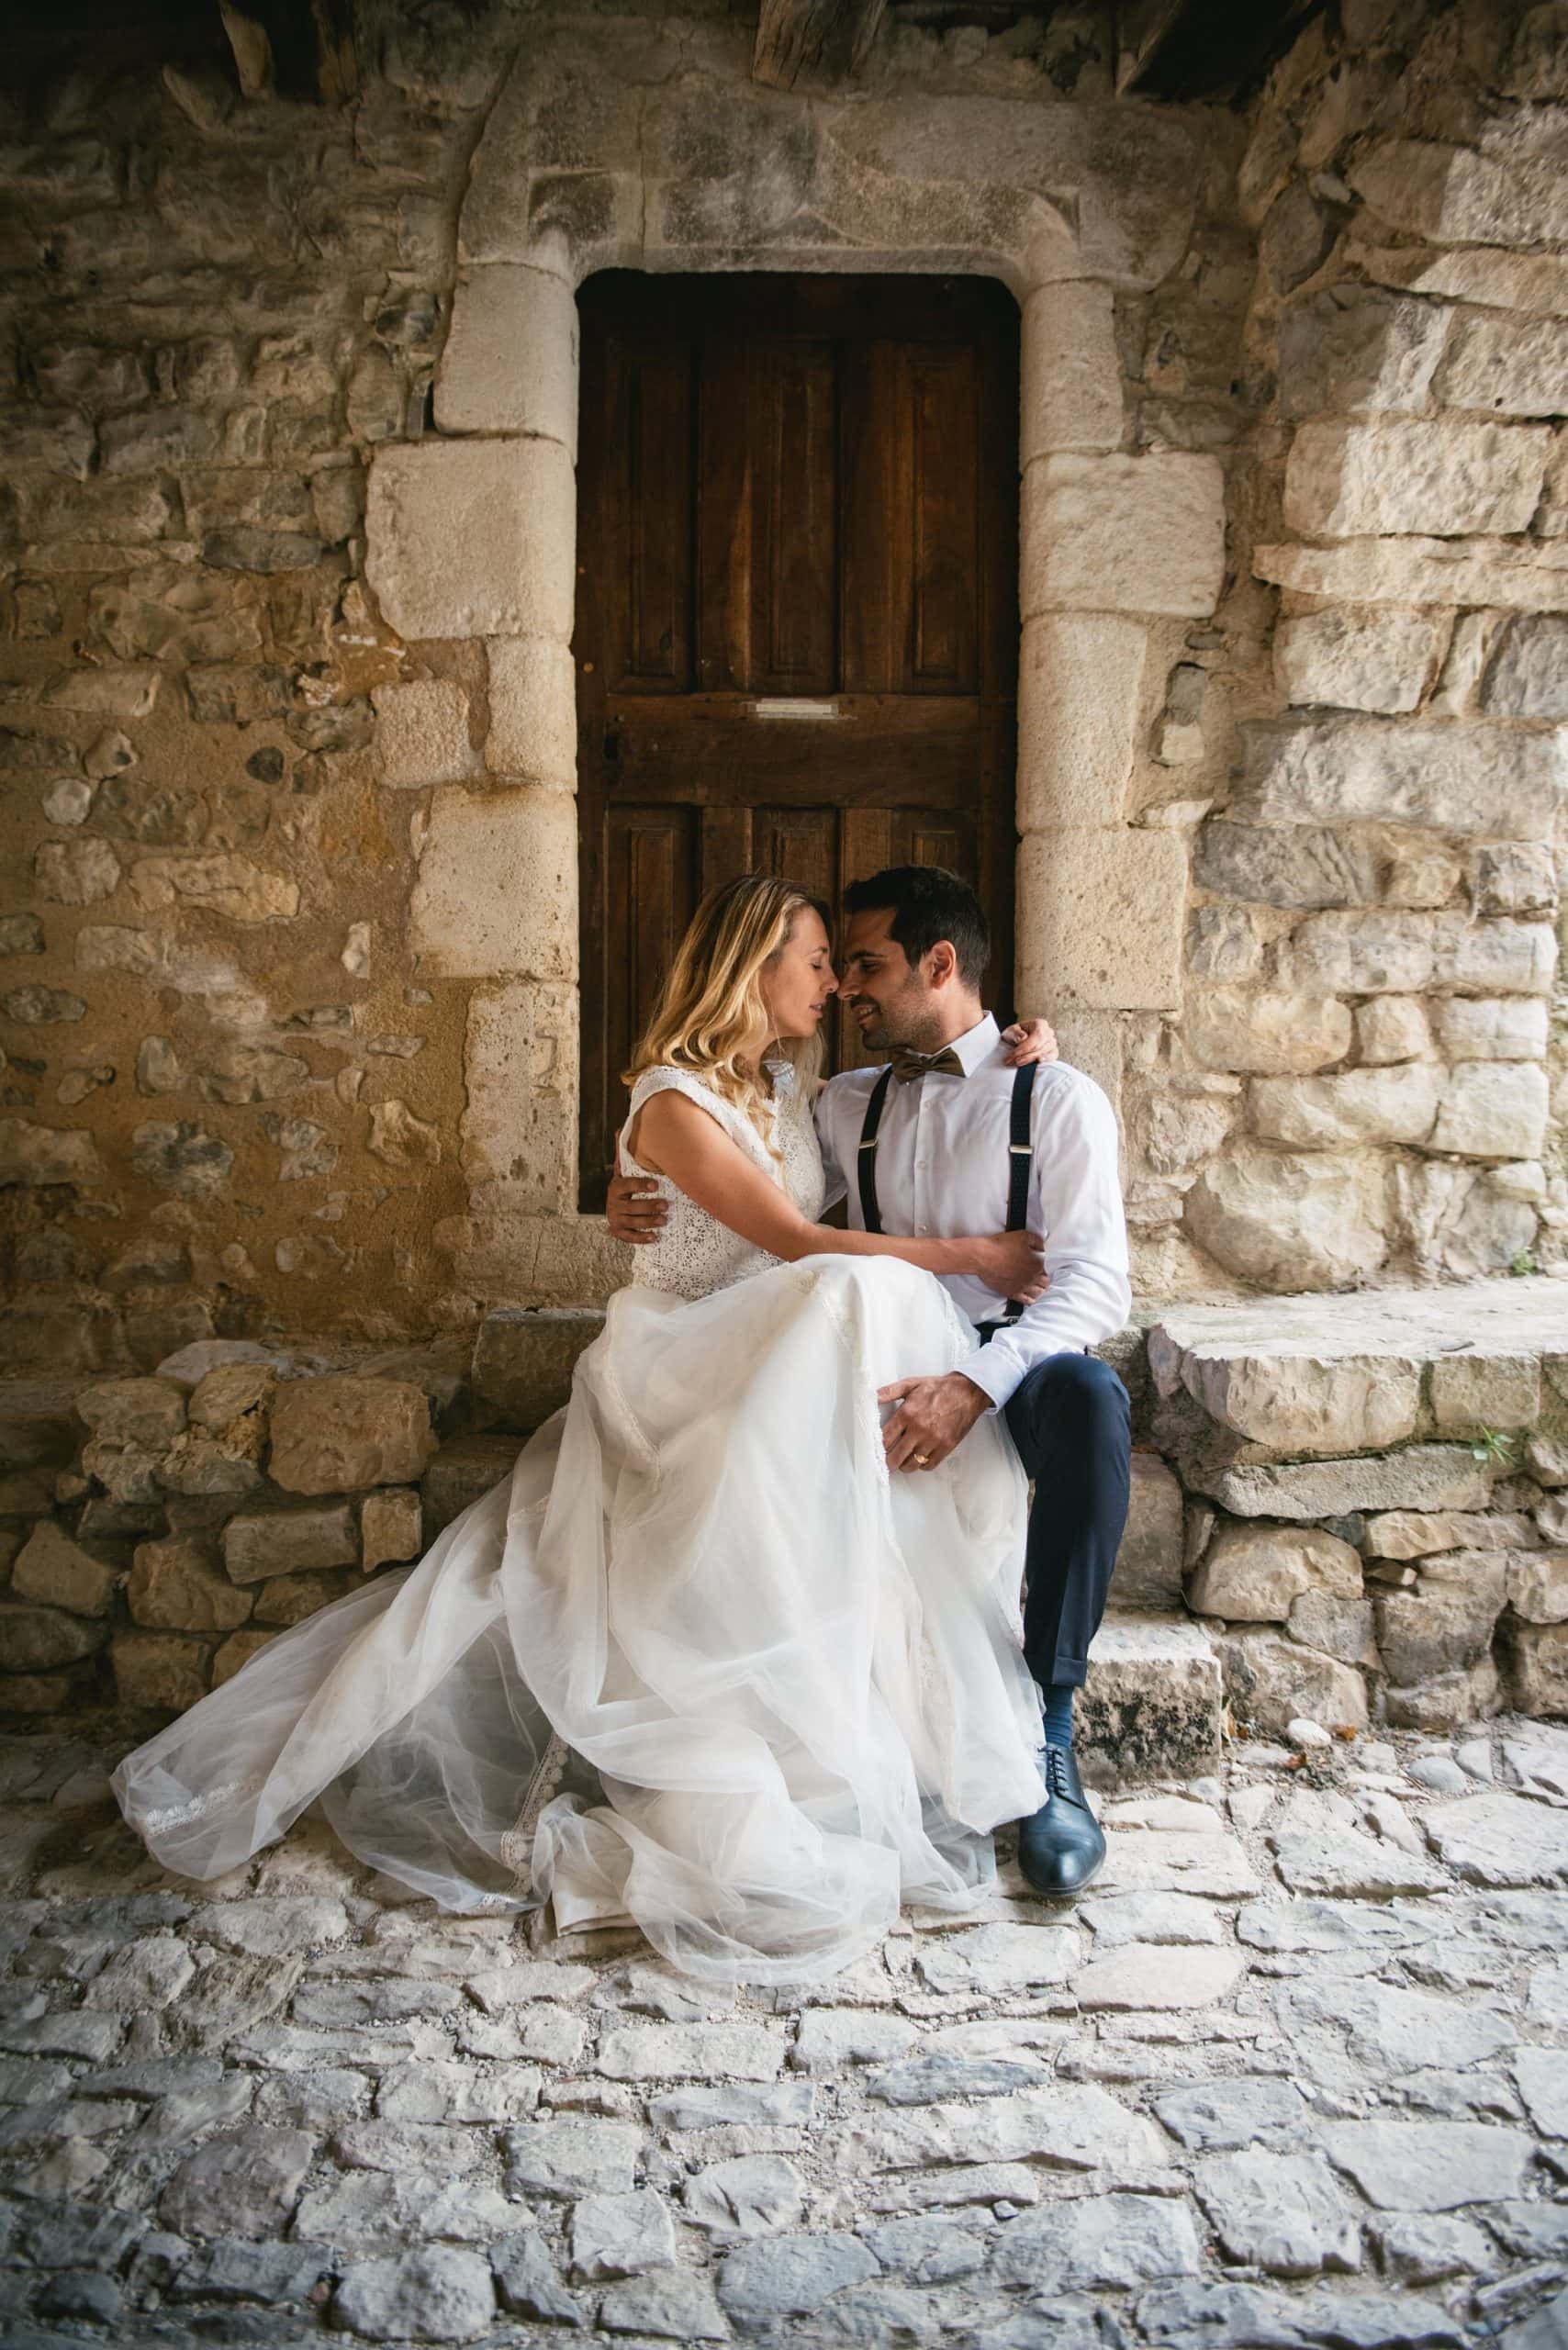 Why plan an elopement in France